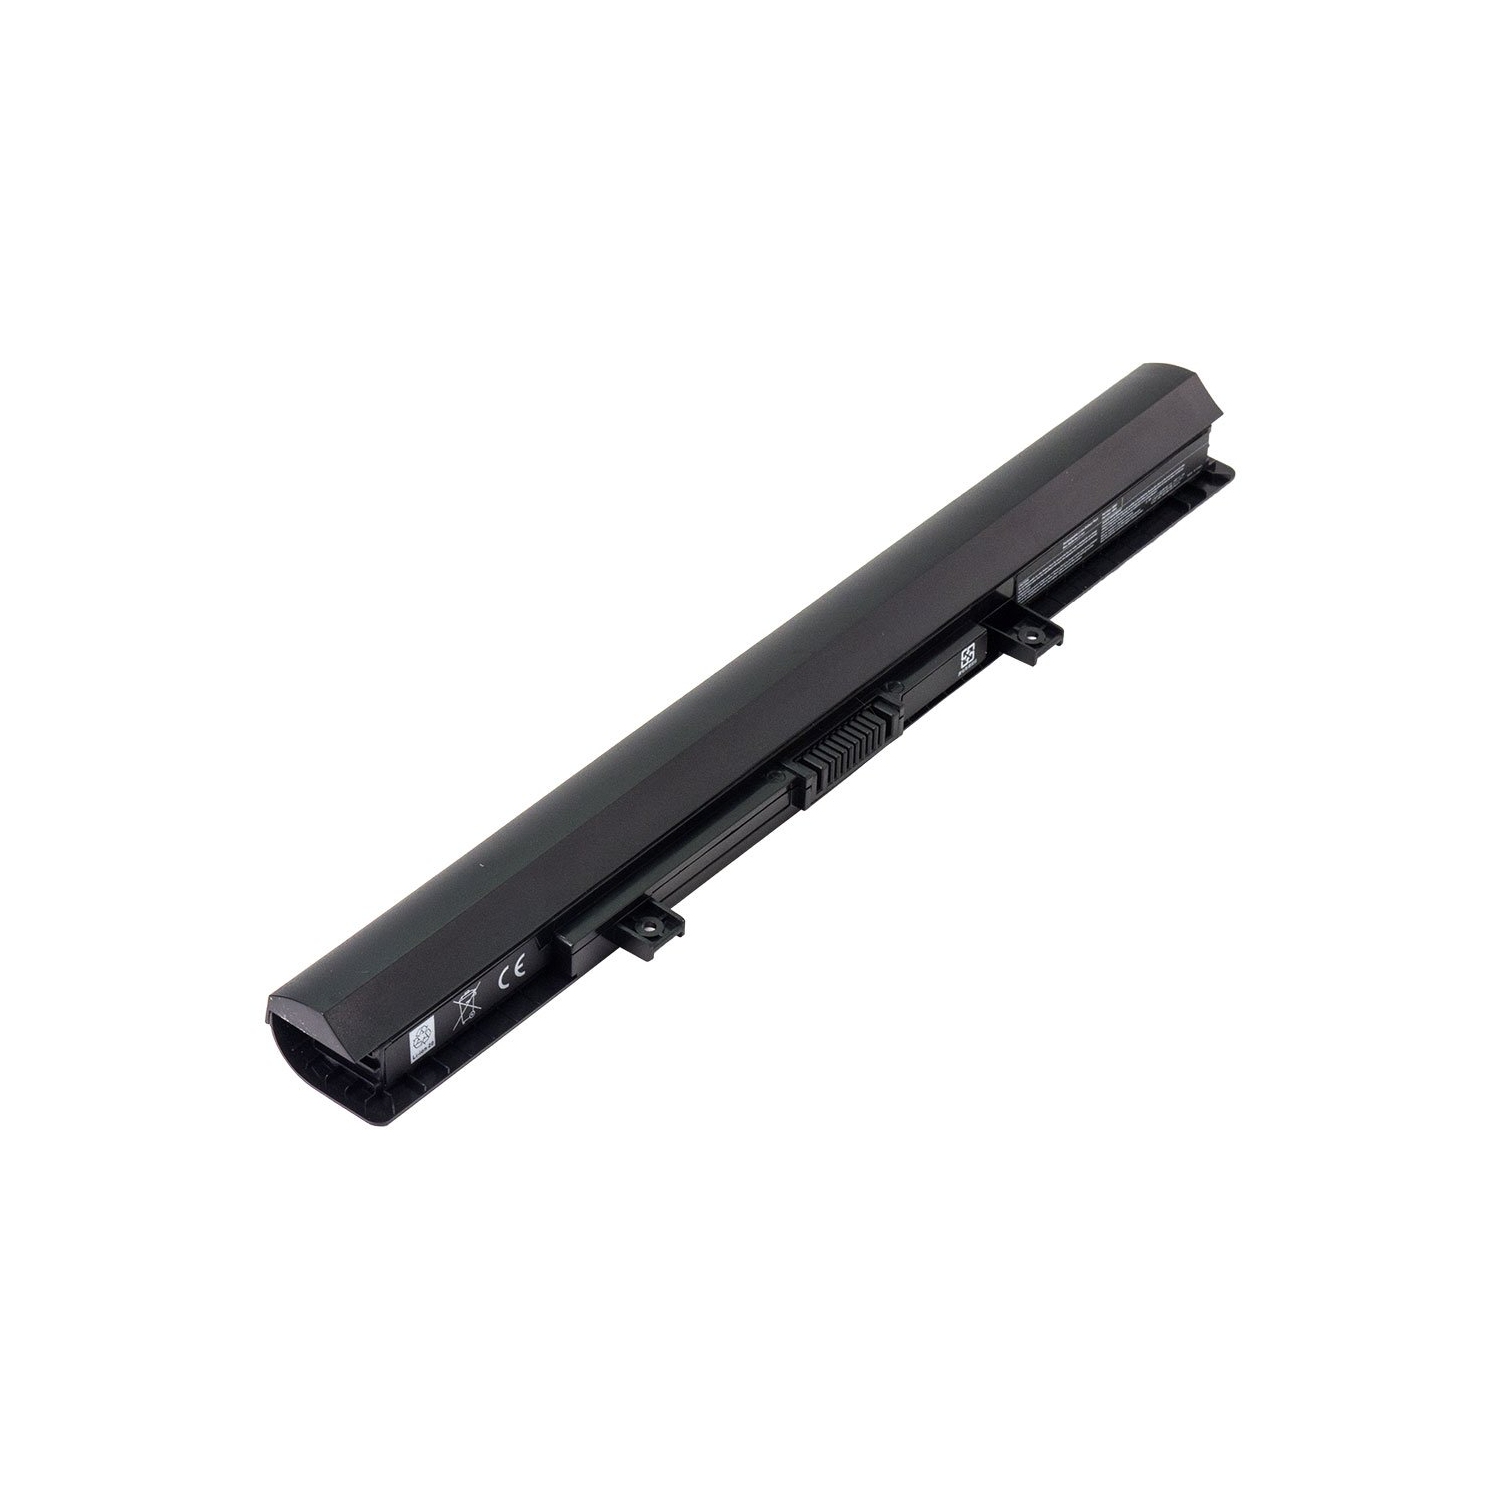 Laptop Battery Replacement for Toshiba Satellite Pro C50-B2001, PA5184U-1BRS,PA5185U, PA5185U-1BRS, PA5186U-1BRS, PA5195U-1BRS